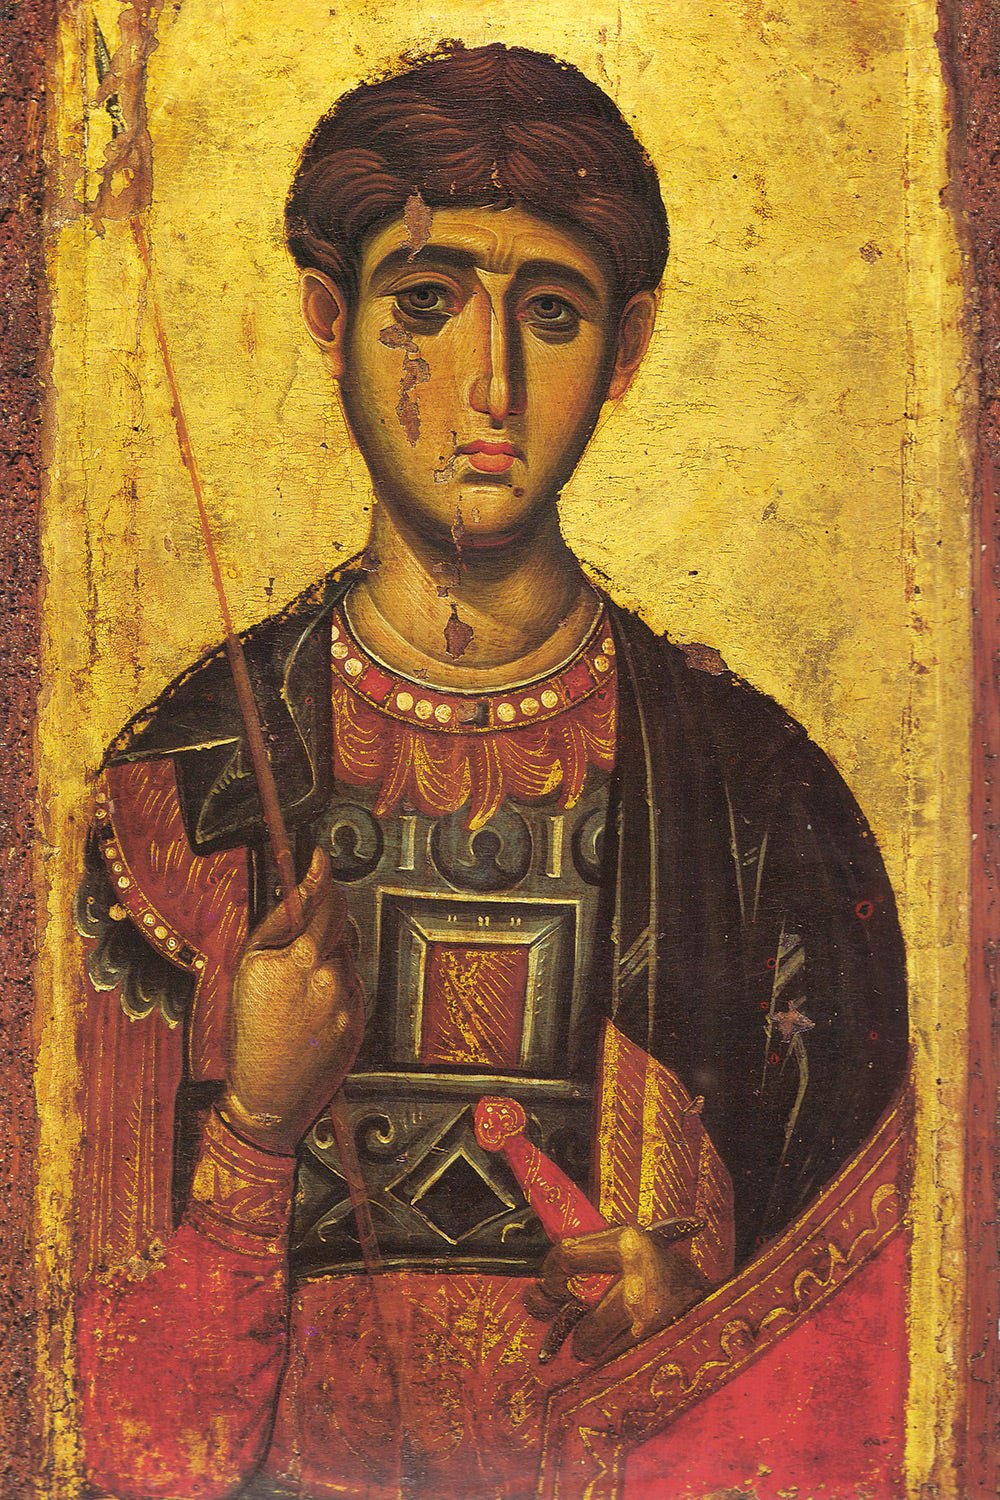 The Intercession of the Saints - A Homily on the Feast of the Great-martyr Demetrios of Thessalonika